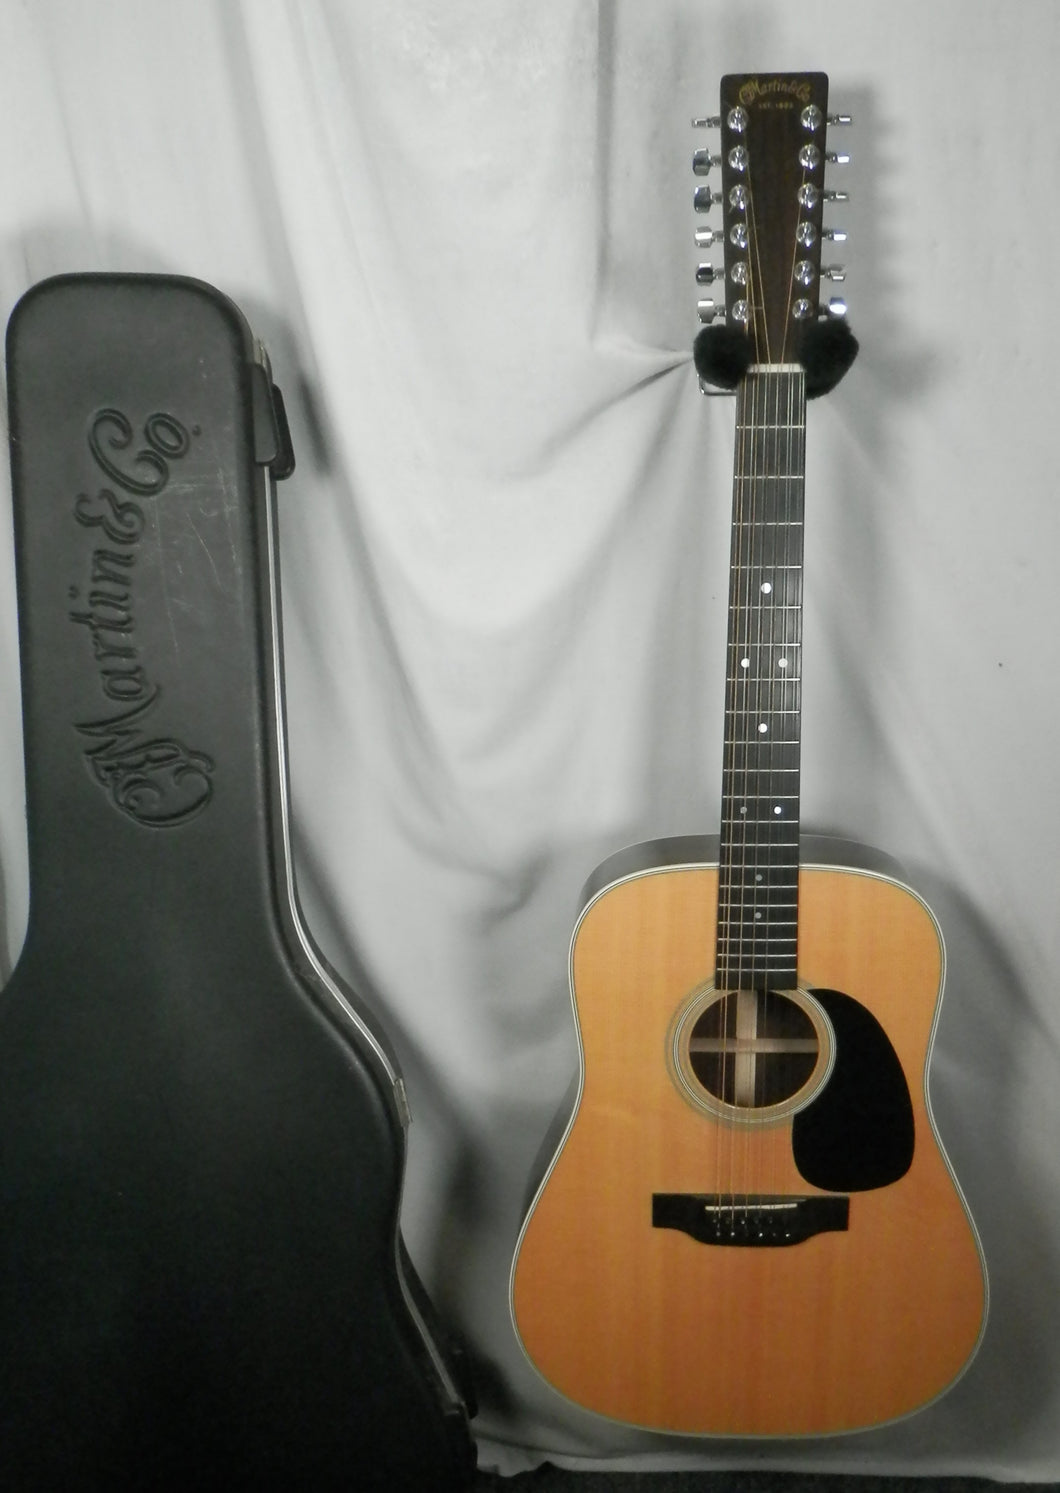 Martin D12-28 12-string Dreadnought Acoustic Guitar with case 1998